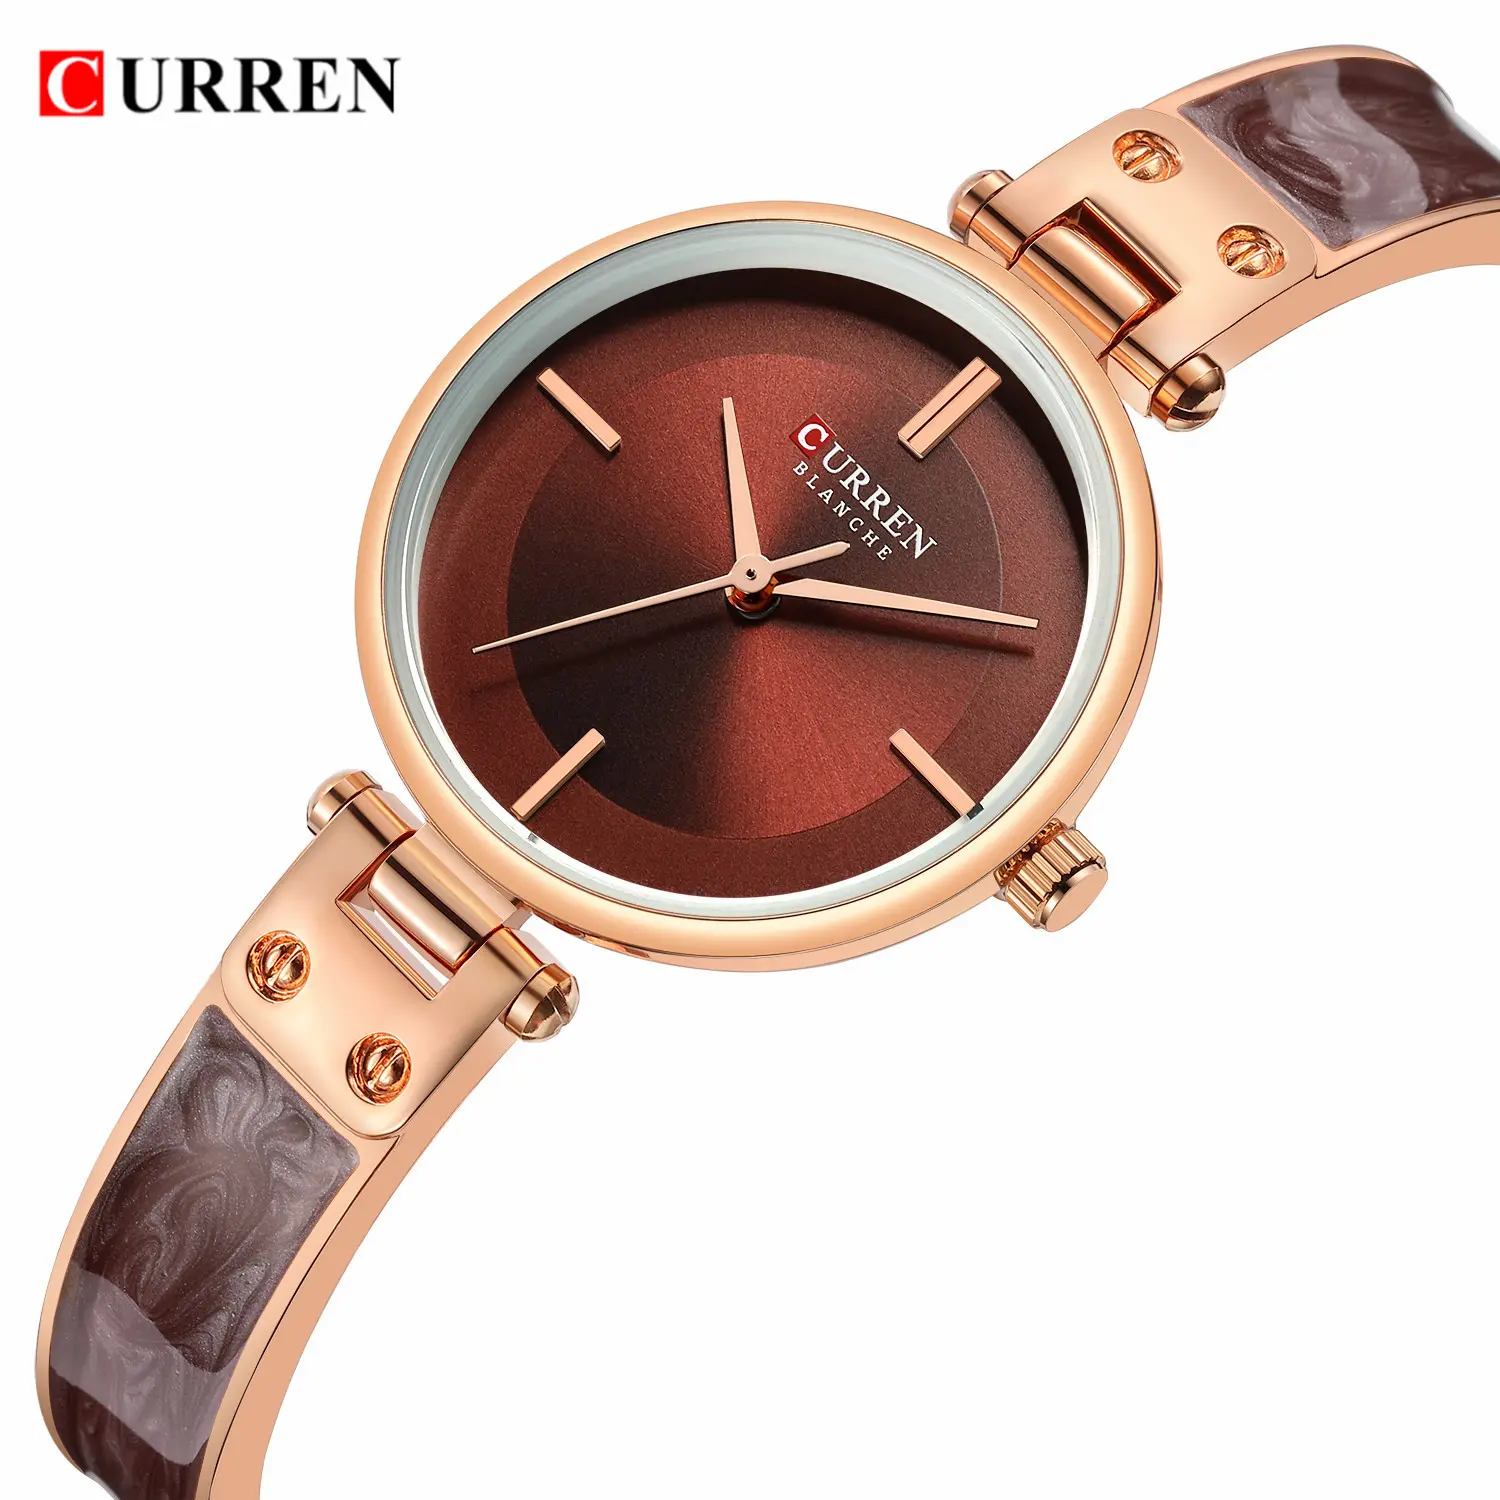 CURREN 9058 Famous Brand Watch For Women with Small Stainless Stand Band Charm Bracelet Watch Analog Minimalist Wristwatch New